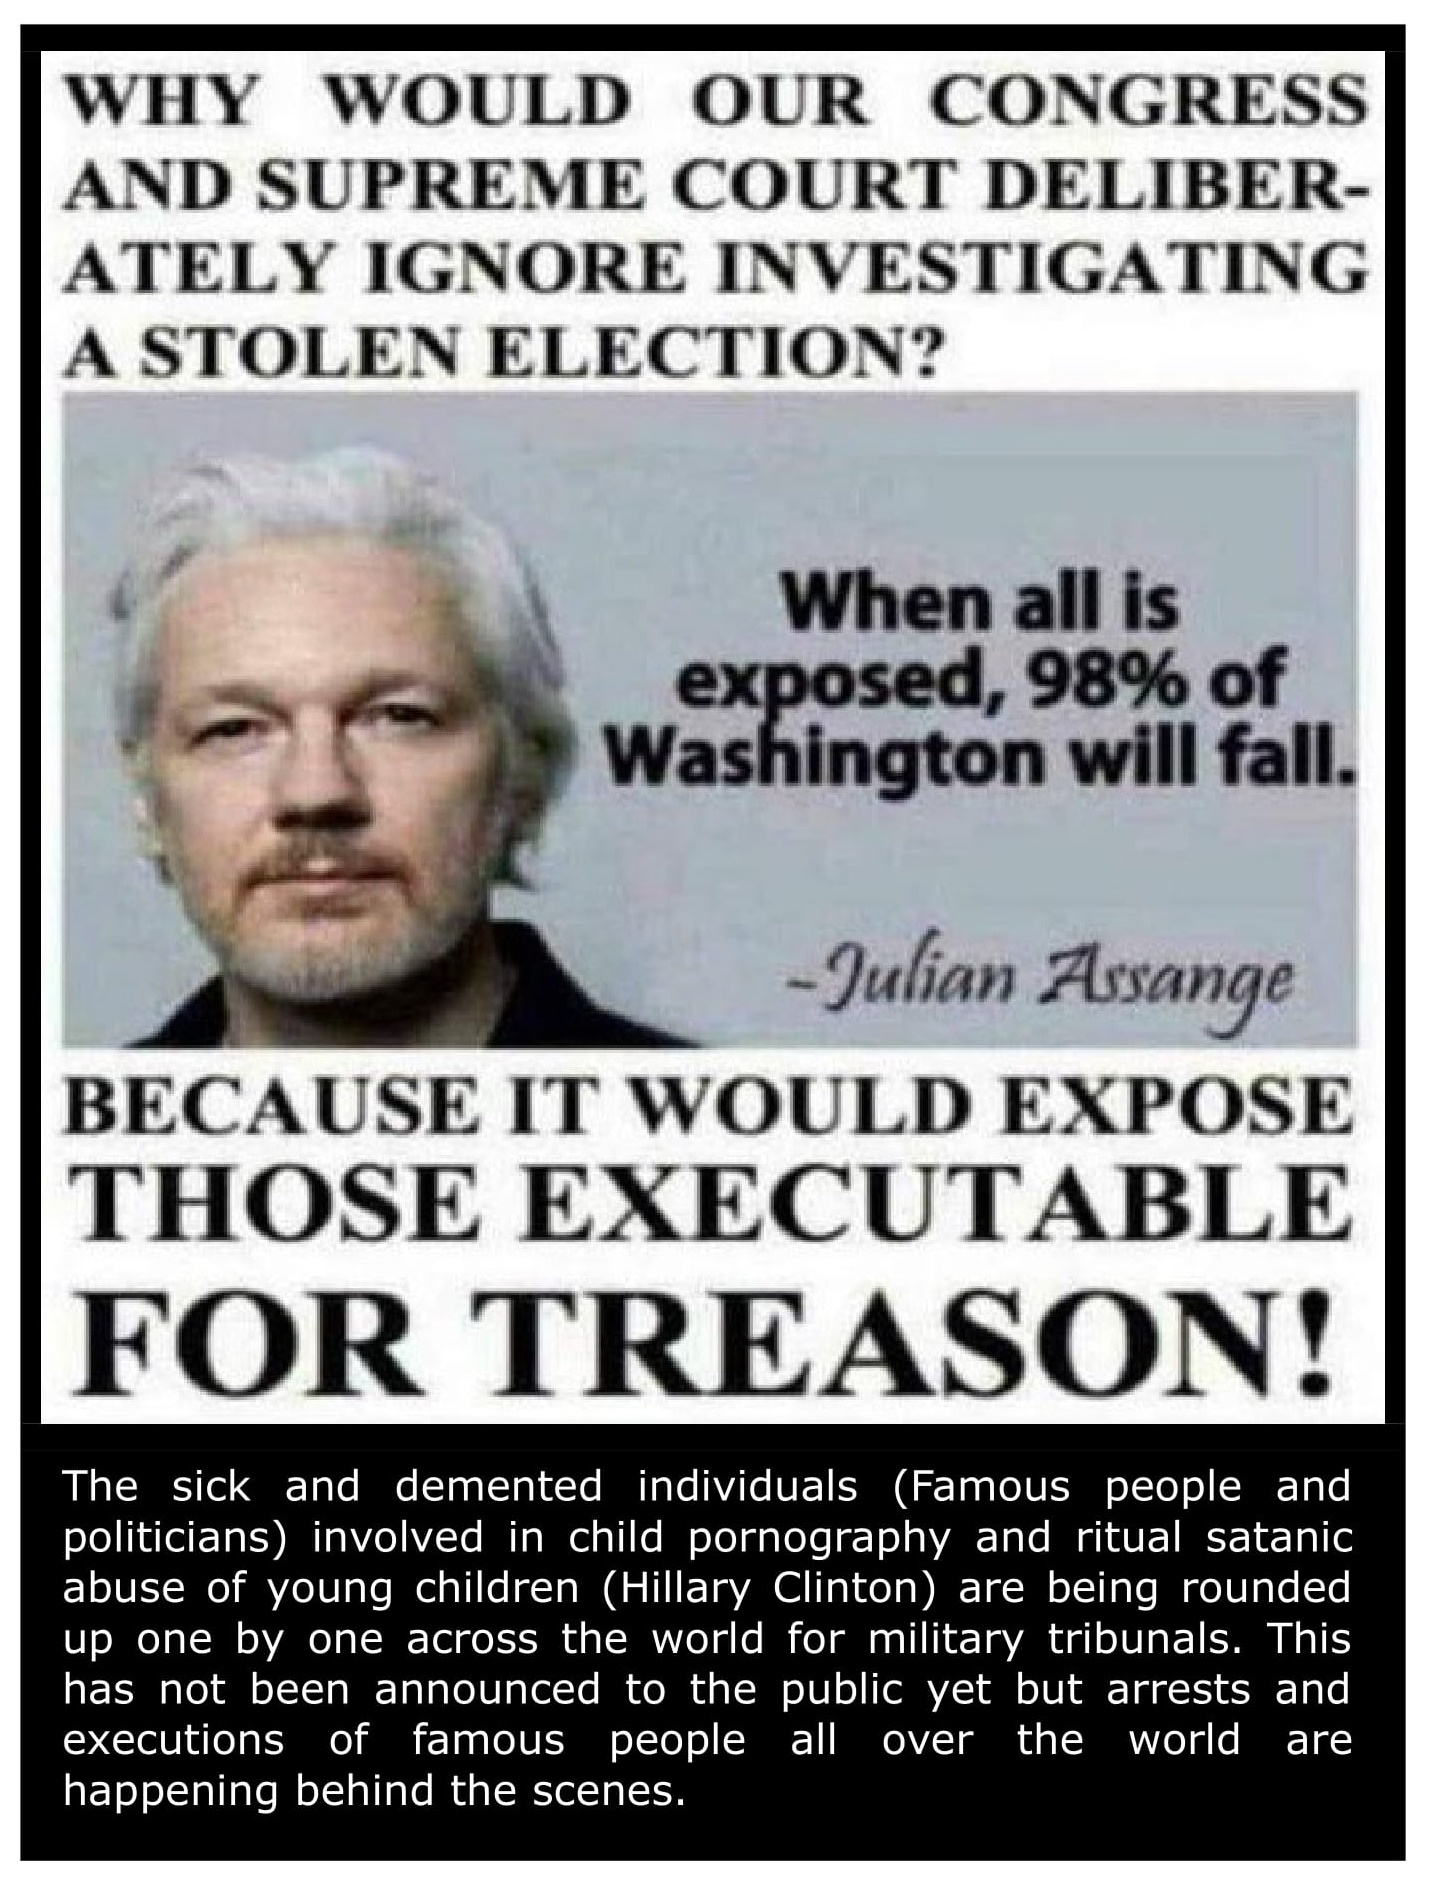 WHO is Executable for TREASON